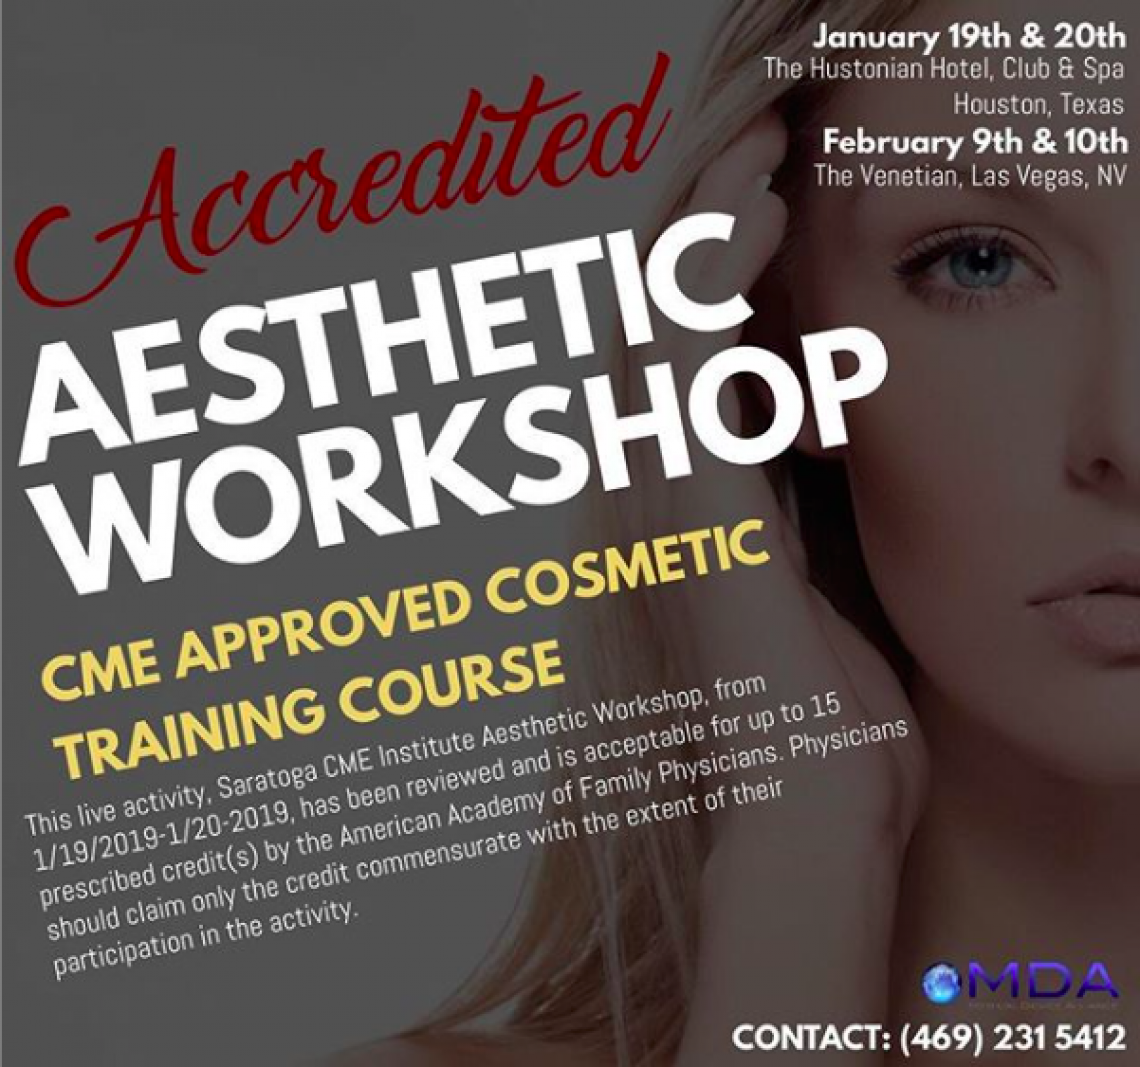 Accredited Aesthetic Workshop 